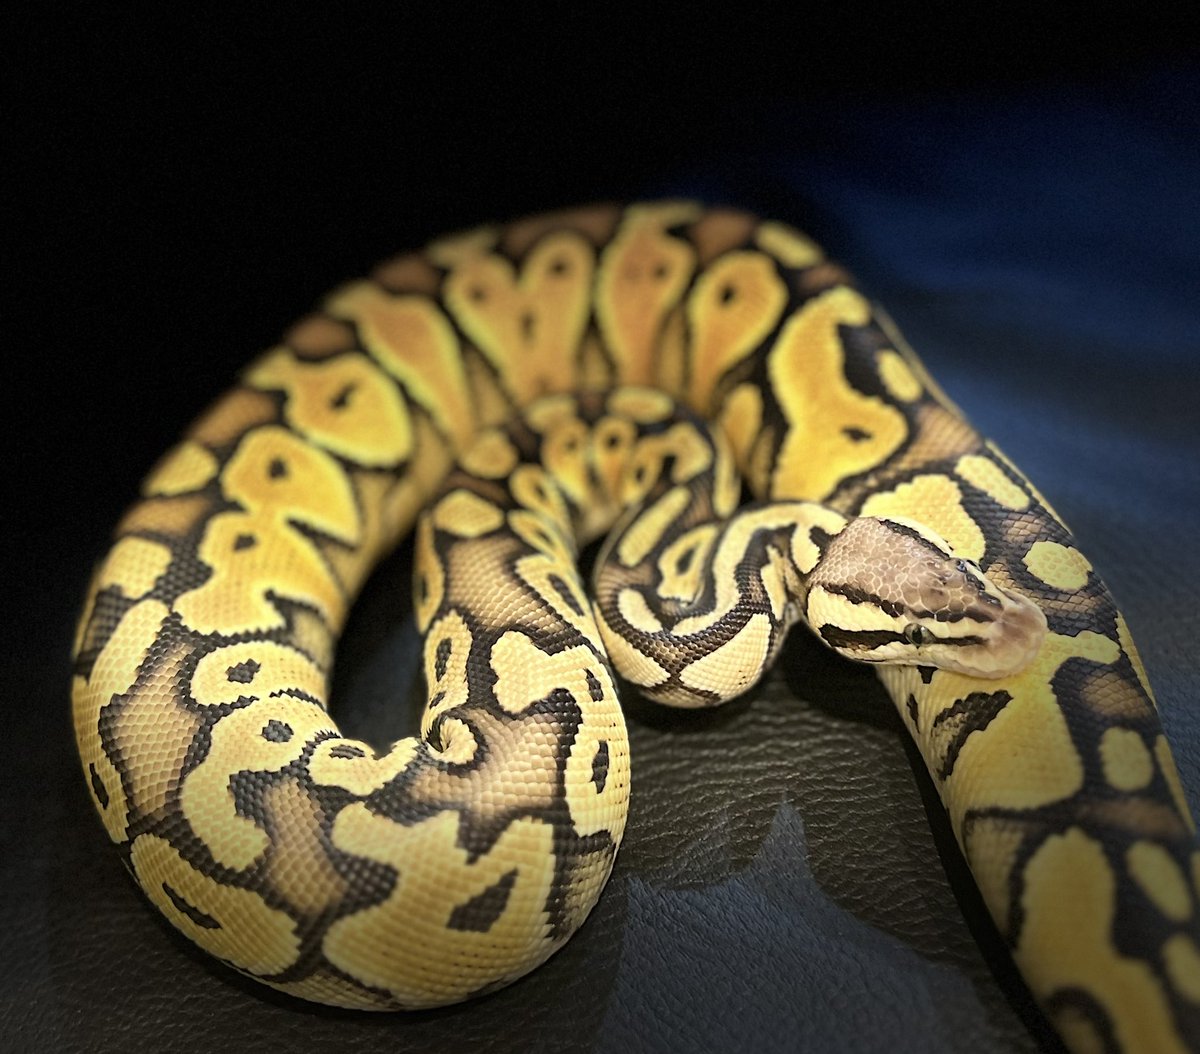 Looks like it will be ready by the end of the year
 Will there be an AXAN that I have never seen before 🤩 

#ballpython #ballpythons #ballpythonclown #ballpythonbreeding #ballpythonbreeder #ballpythonmorph #ballpythonmorphs #clownproject #axanthicclown #ボールパイソン　#アザン